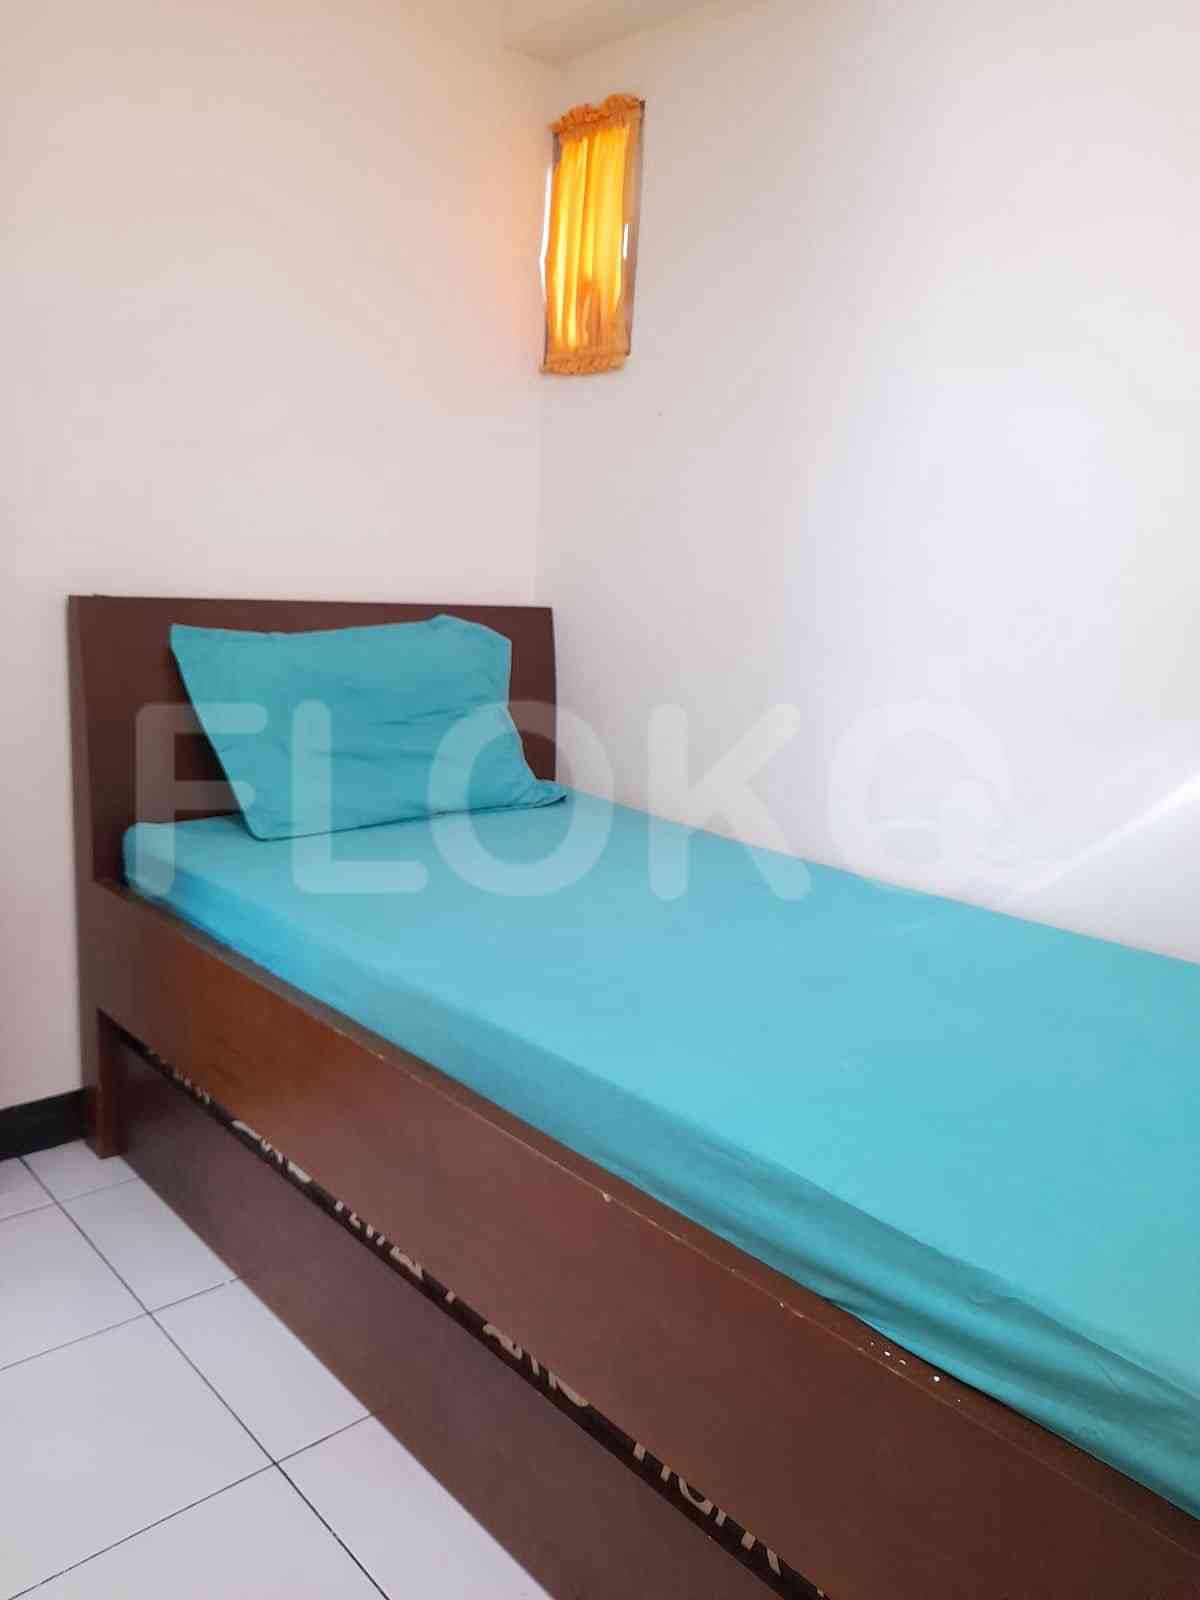 2 Bedroom on 11th Floor for Rent in Sentra Timur Residence - fca193 3